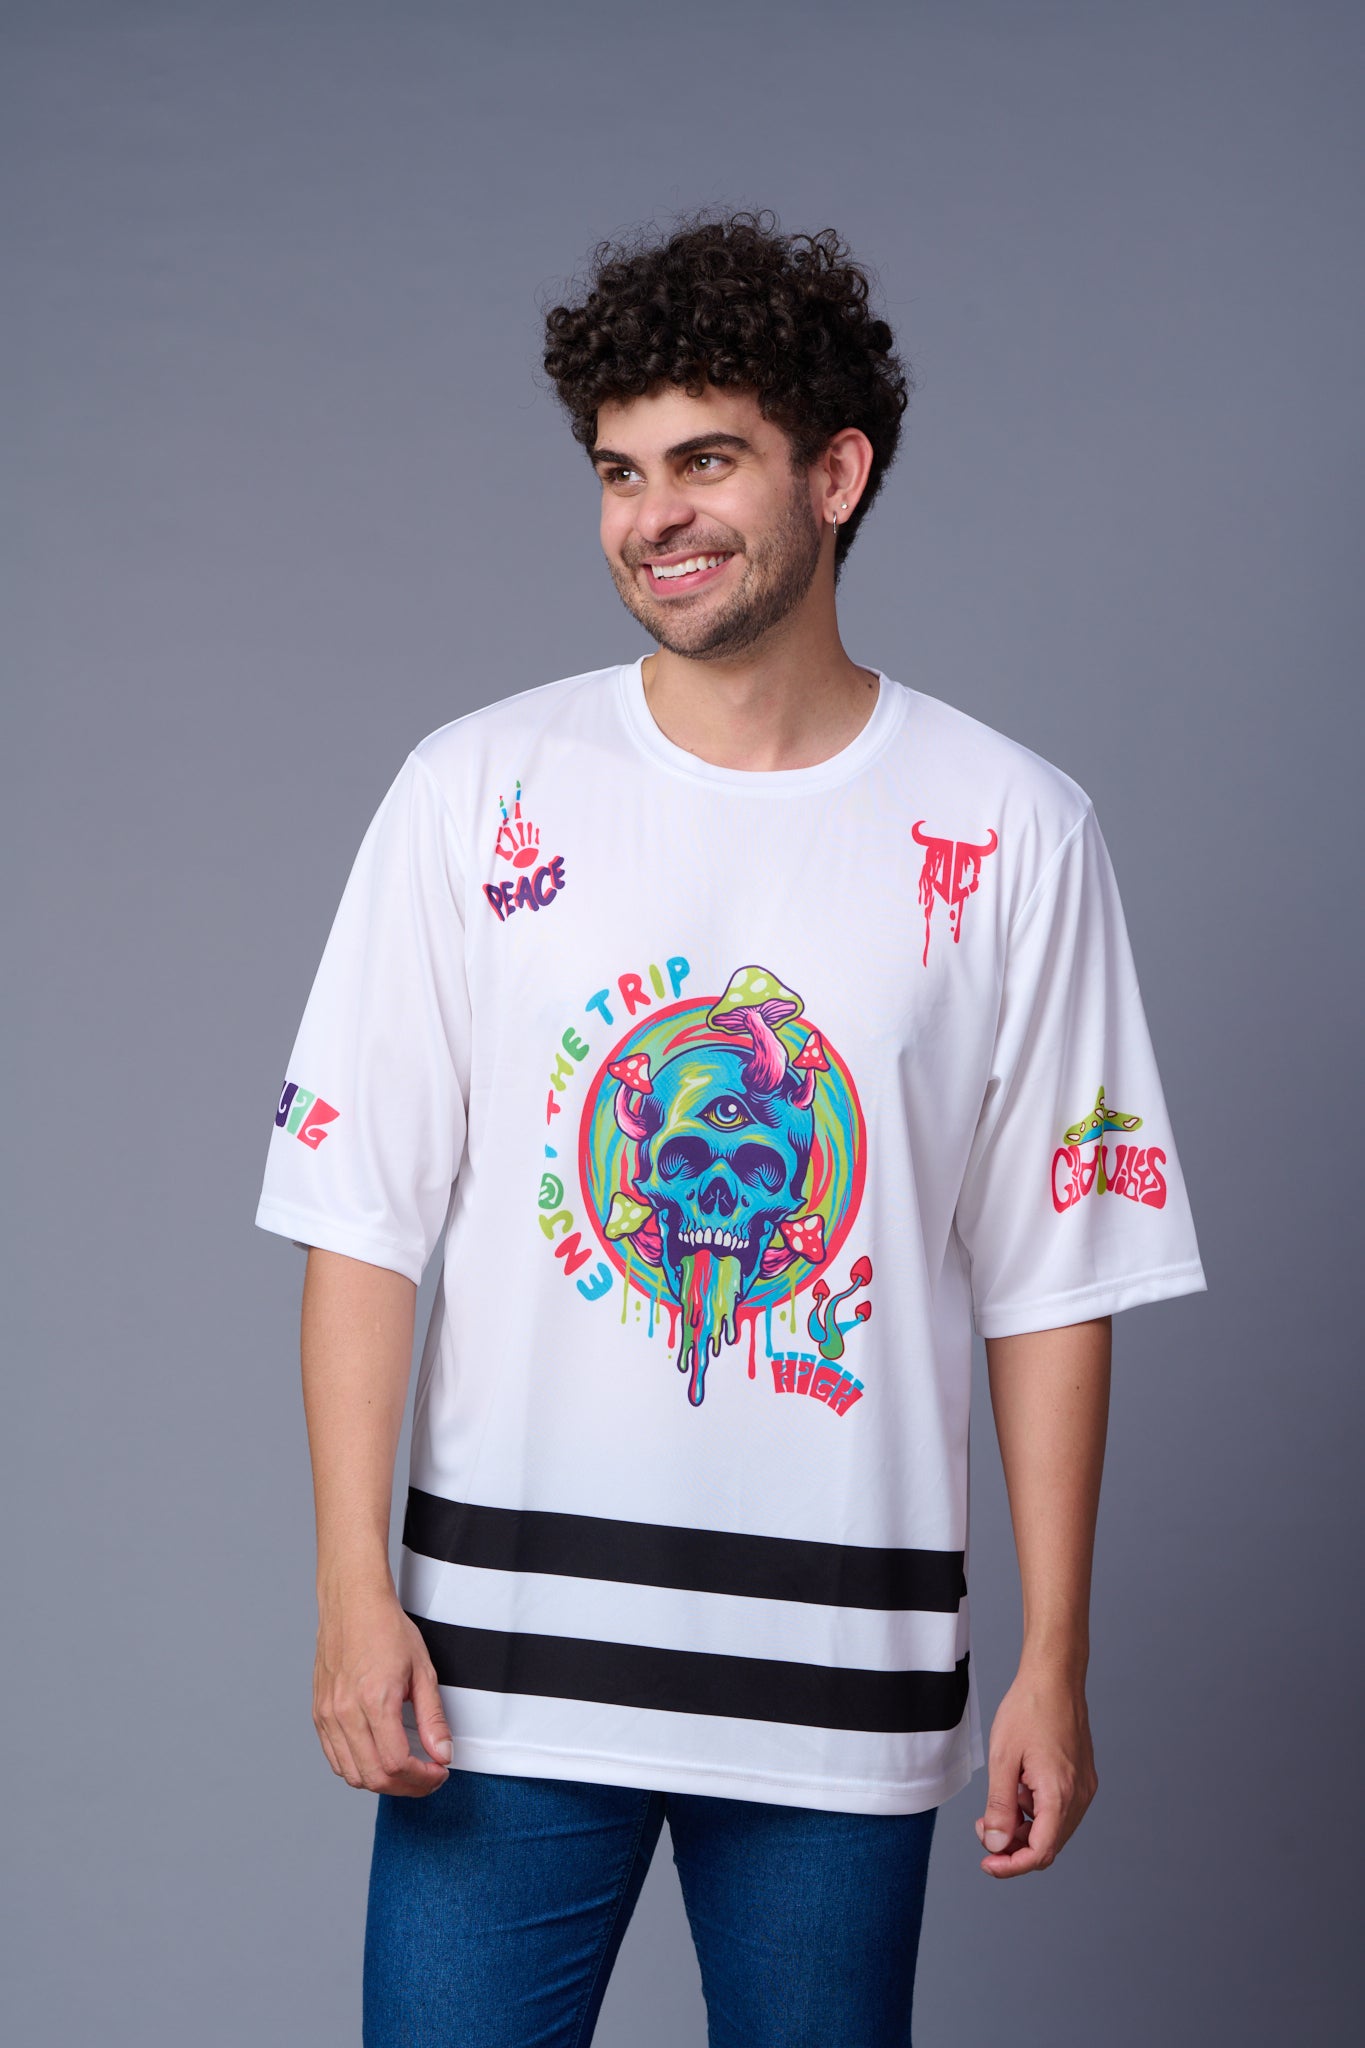 Skull With Enjoy The Trip Printed White Oversized Jersey T-Shirt for Men